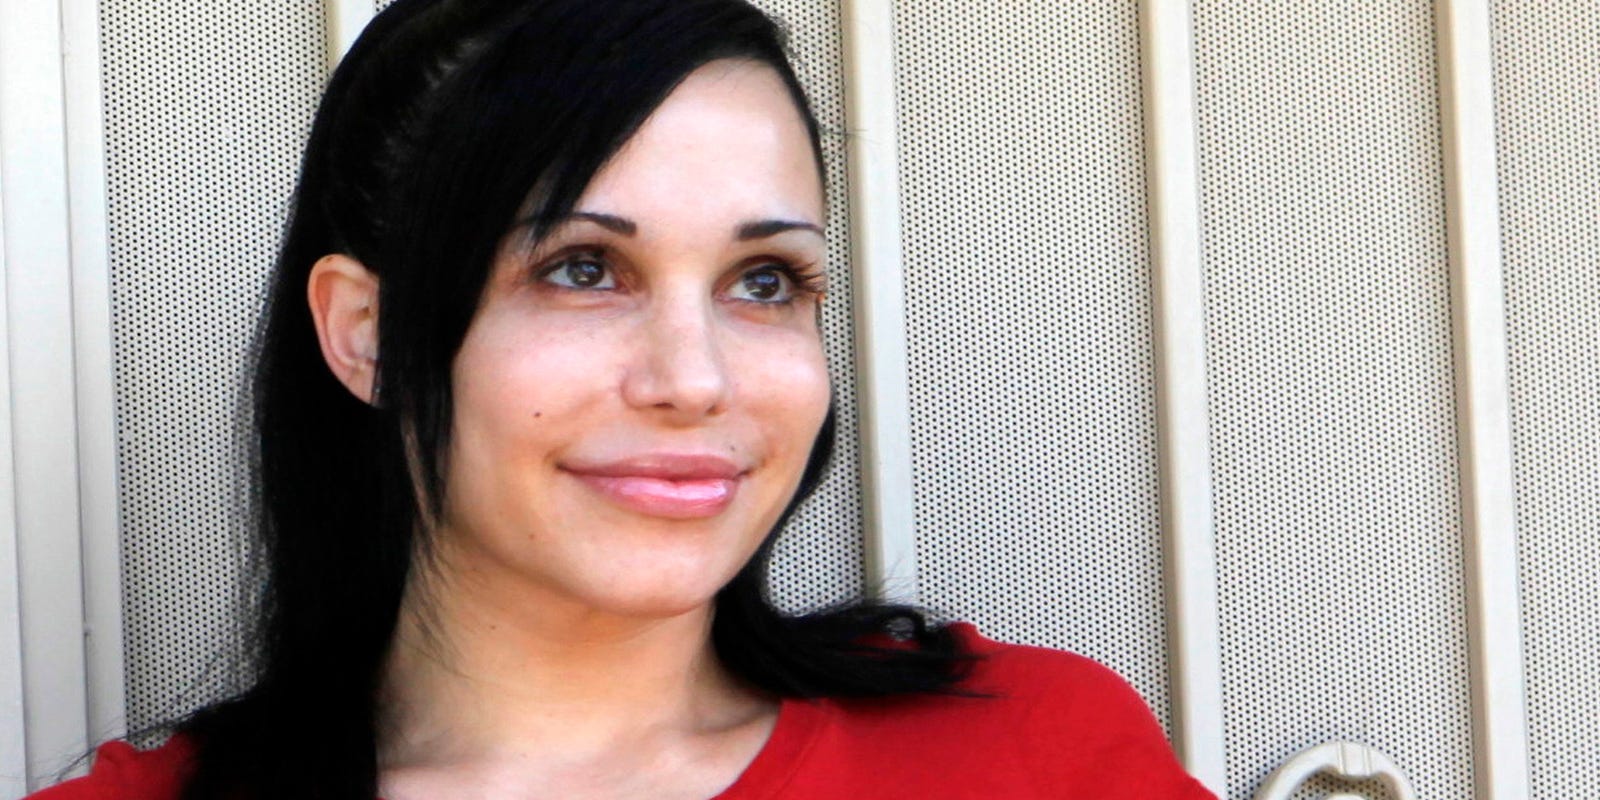 8 facts about 'Octomom' Nadya Suleman